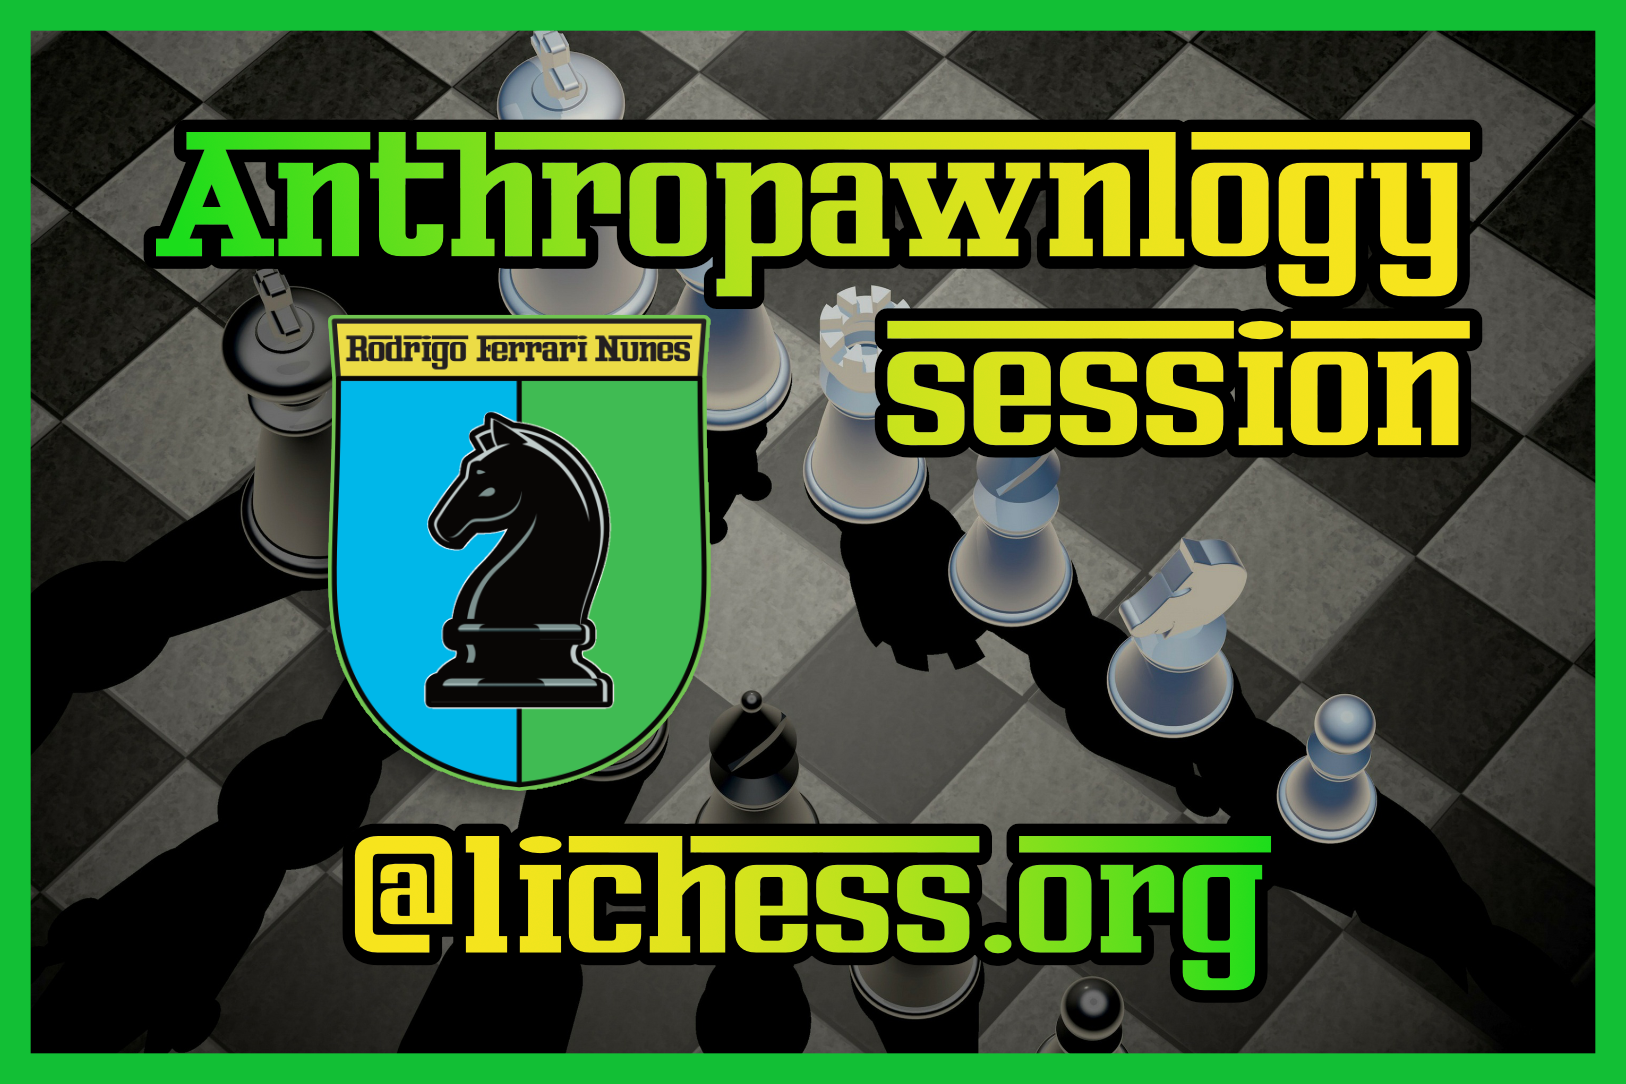 ANTHROPAWNLOGY SESSION #1 @lichess.org - FRIDAY LOUNGE WARM-UP